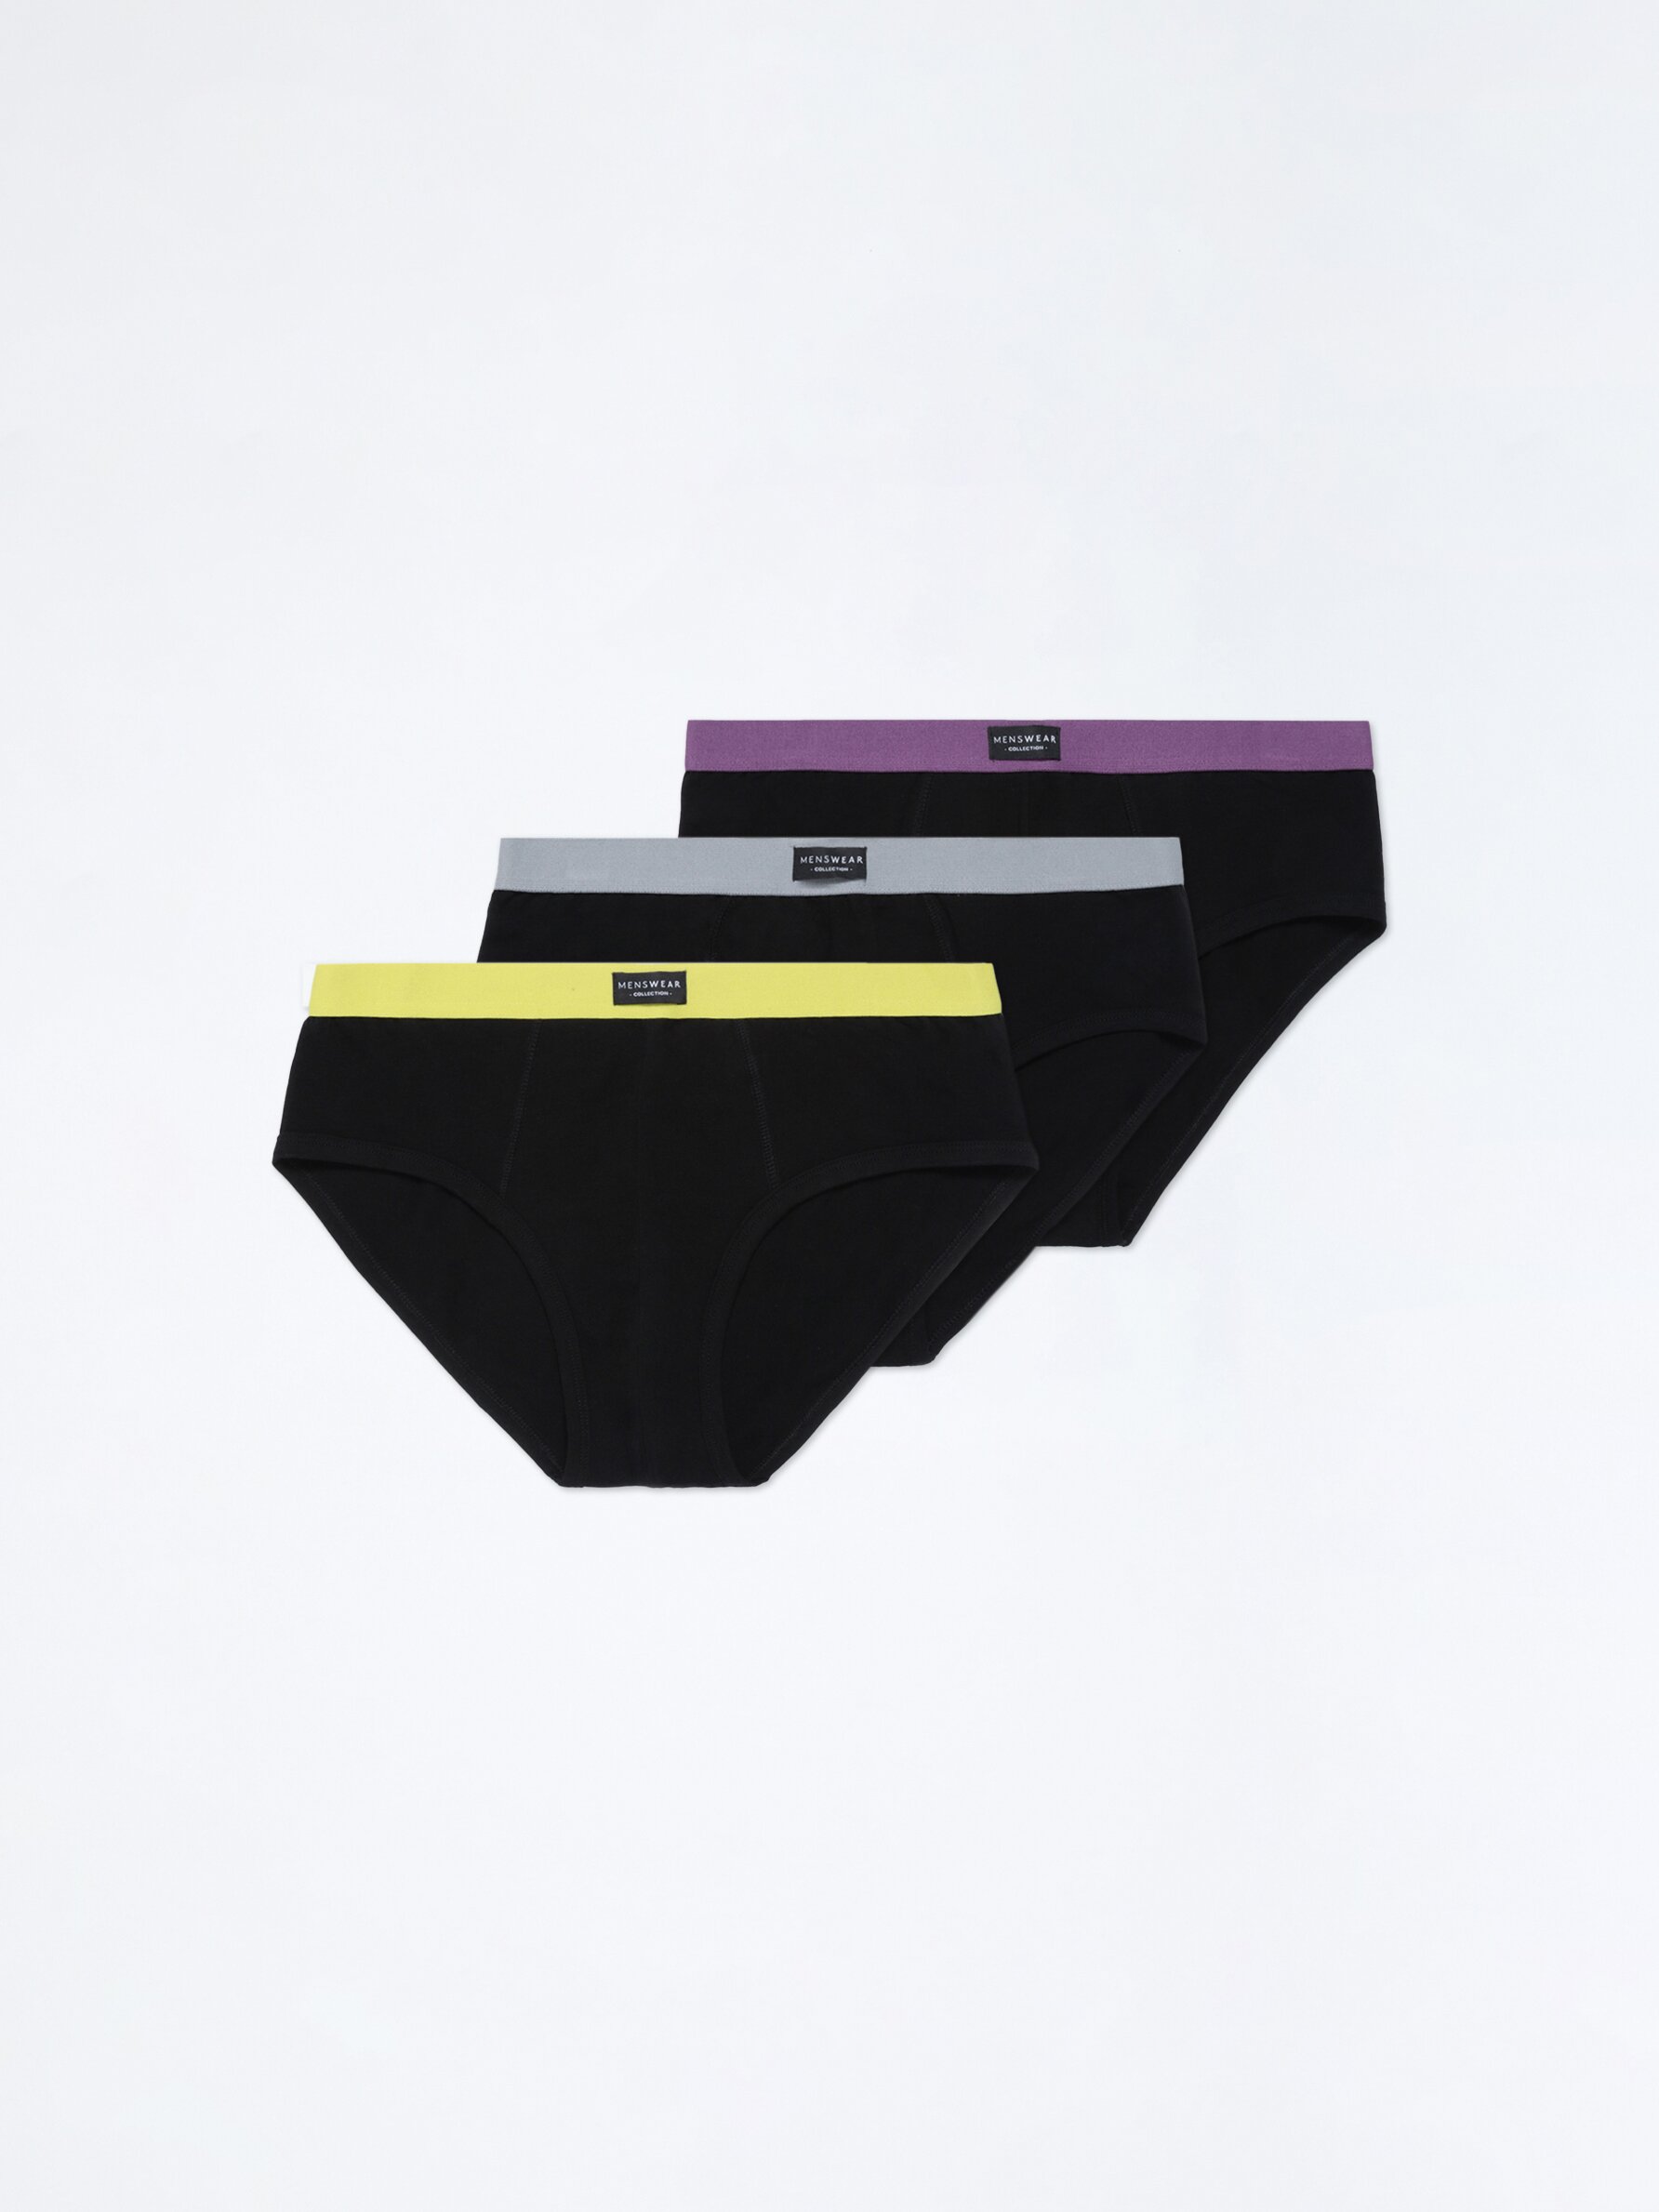 Stretchable and Comfortable Men's Cotton Briefs Low Waist Underclothing